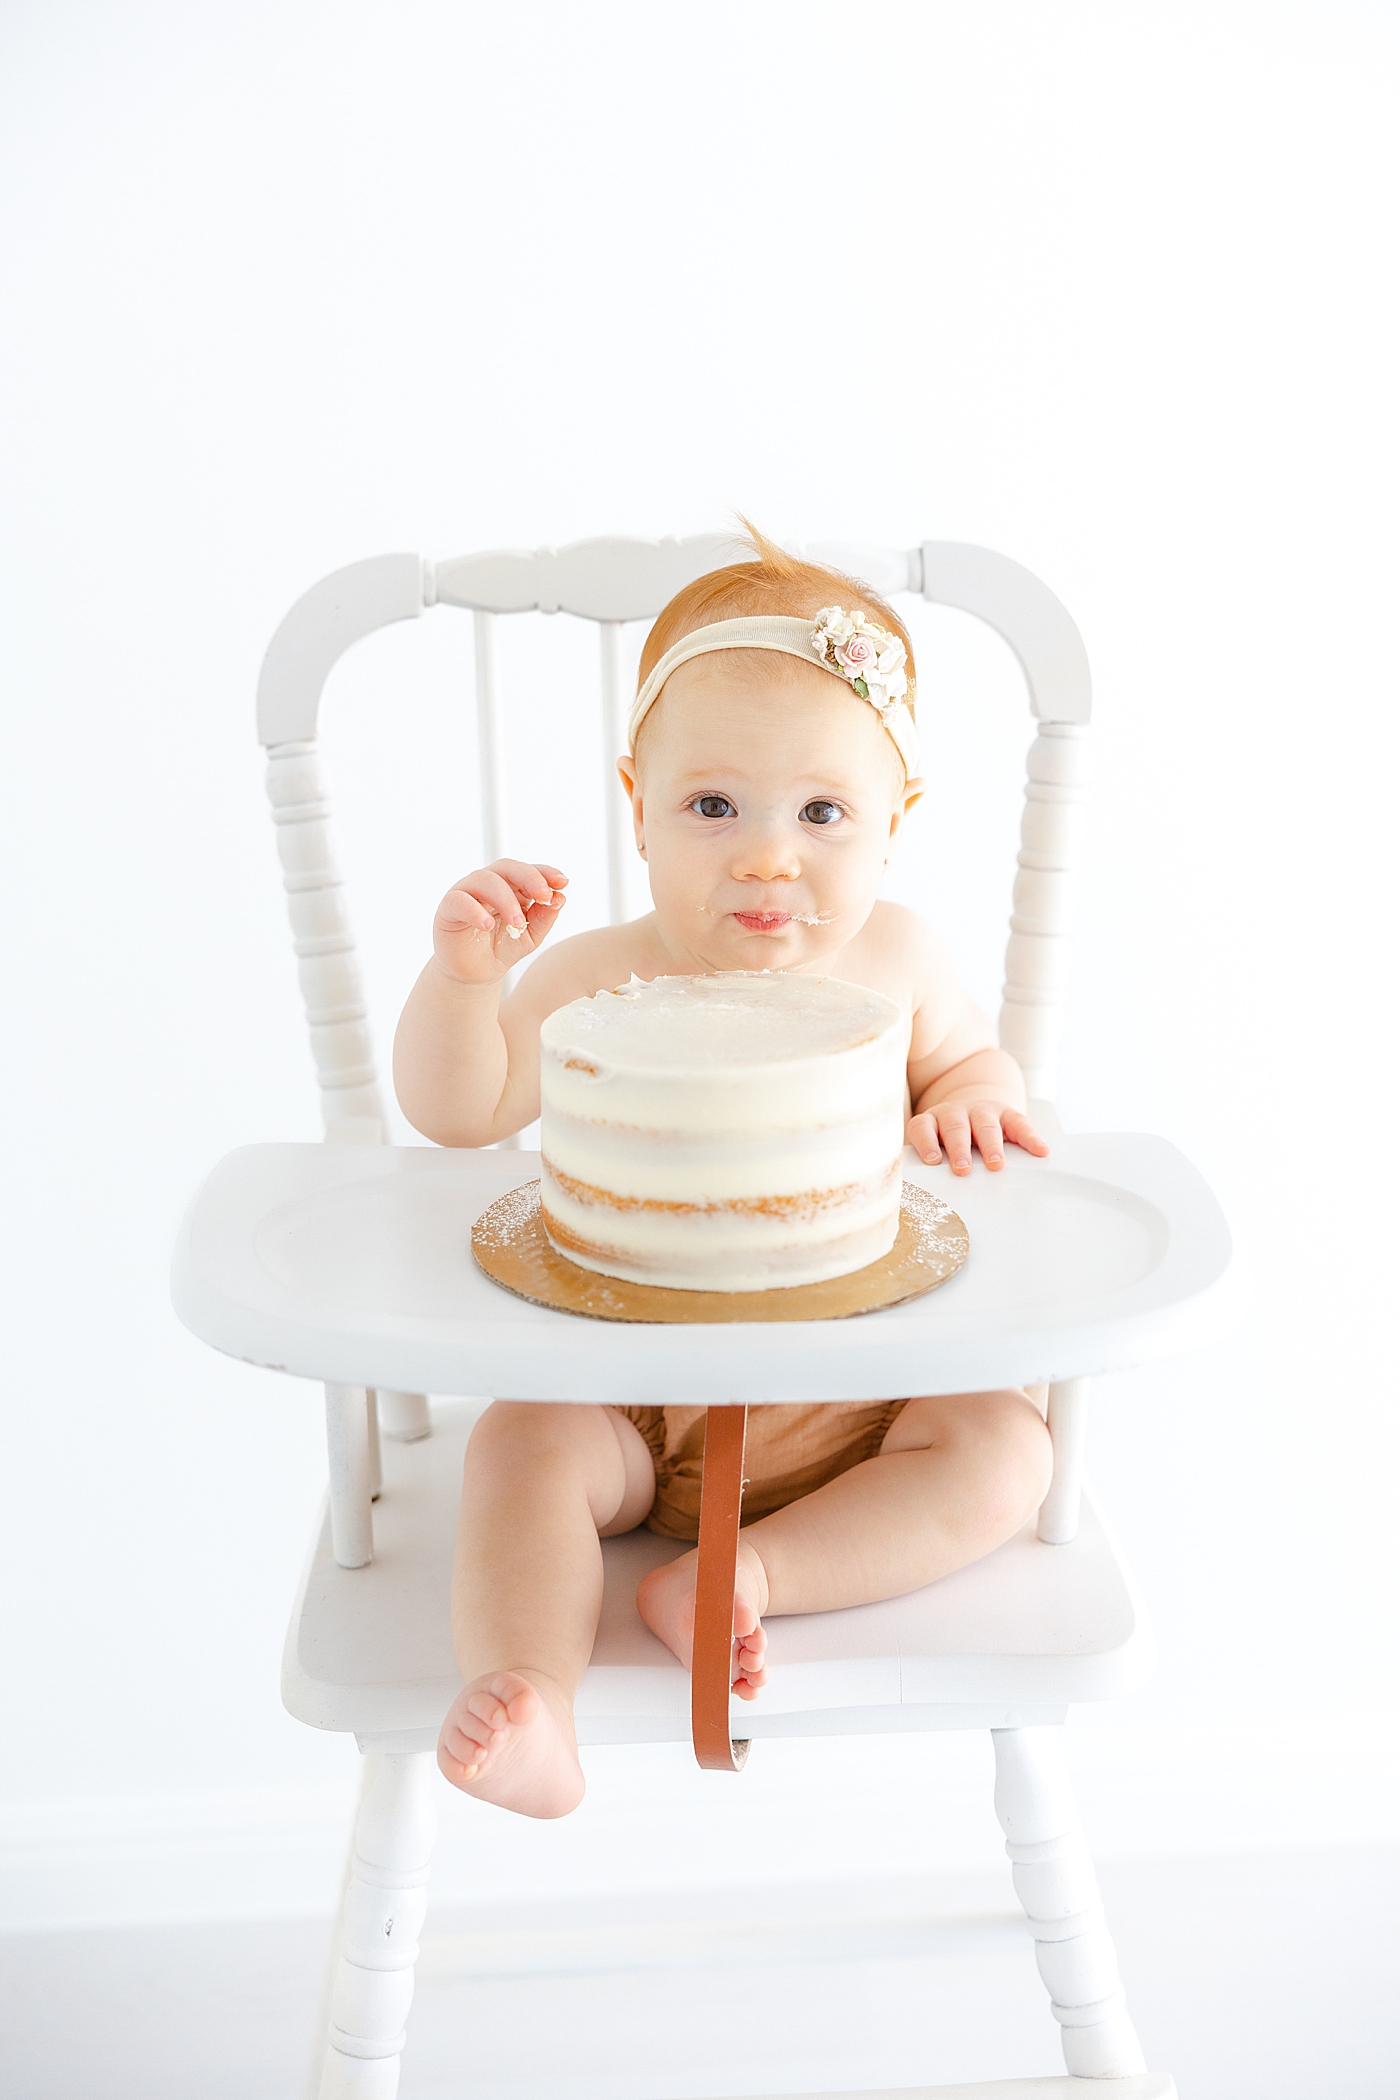 Baby girl eating her smash cake during her One Year Milestone Collection | Image by Sana Ahmed Photography